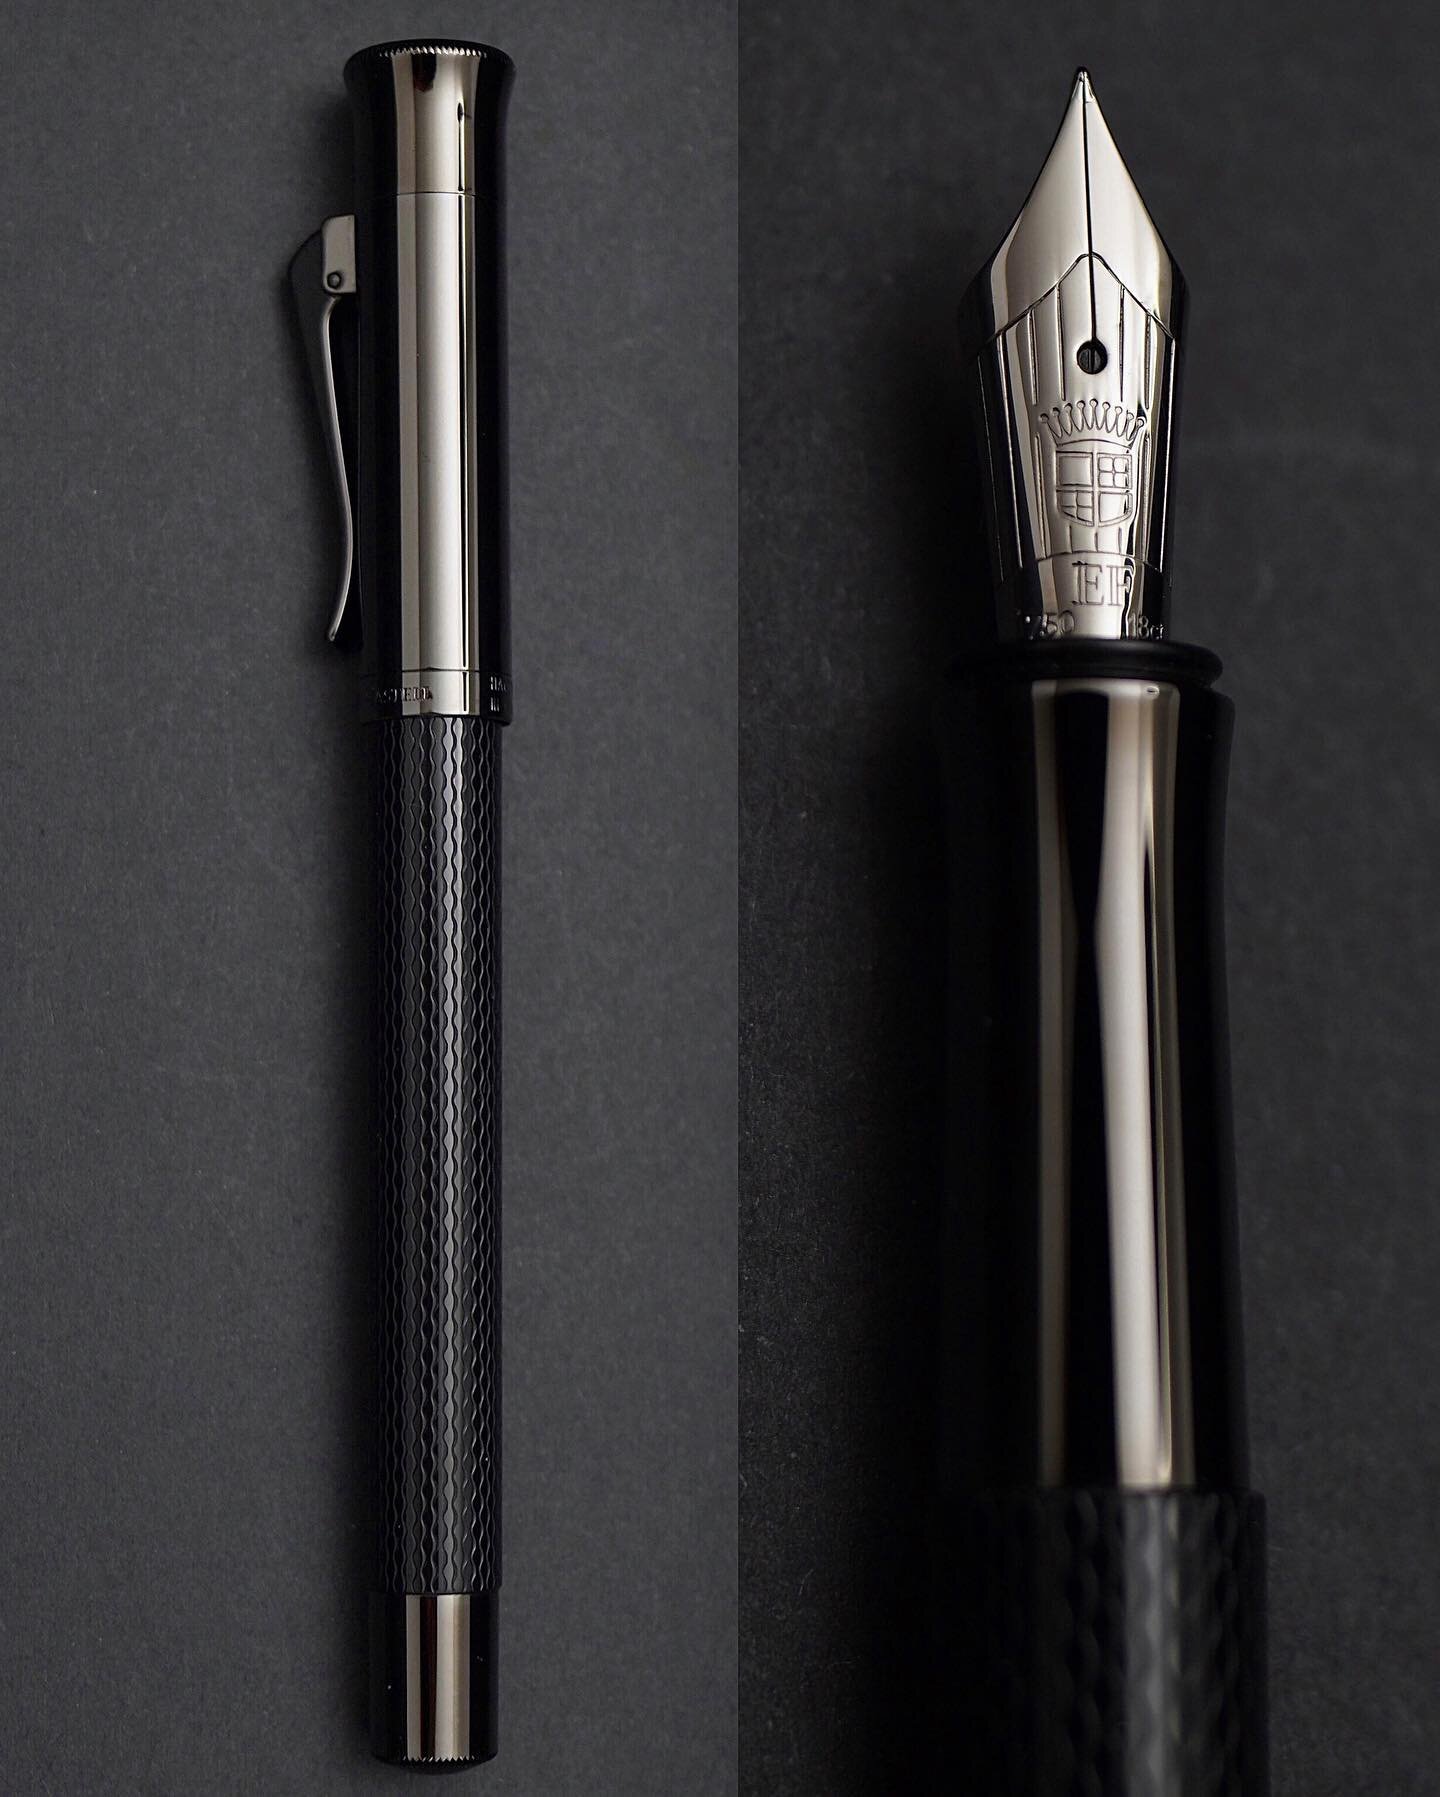 Fresh nib shot for my latest acquisition &mdash; Graf von Faber Castell Guilloche Black Edition with EF nib.

I have to admit, for MODERN fine writing instruments, @grafvonfabercastell is my favourite pen company. I adore the classy designs of their 